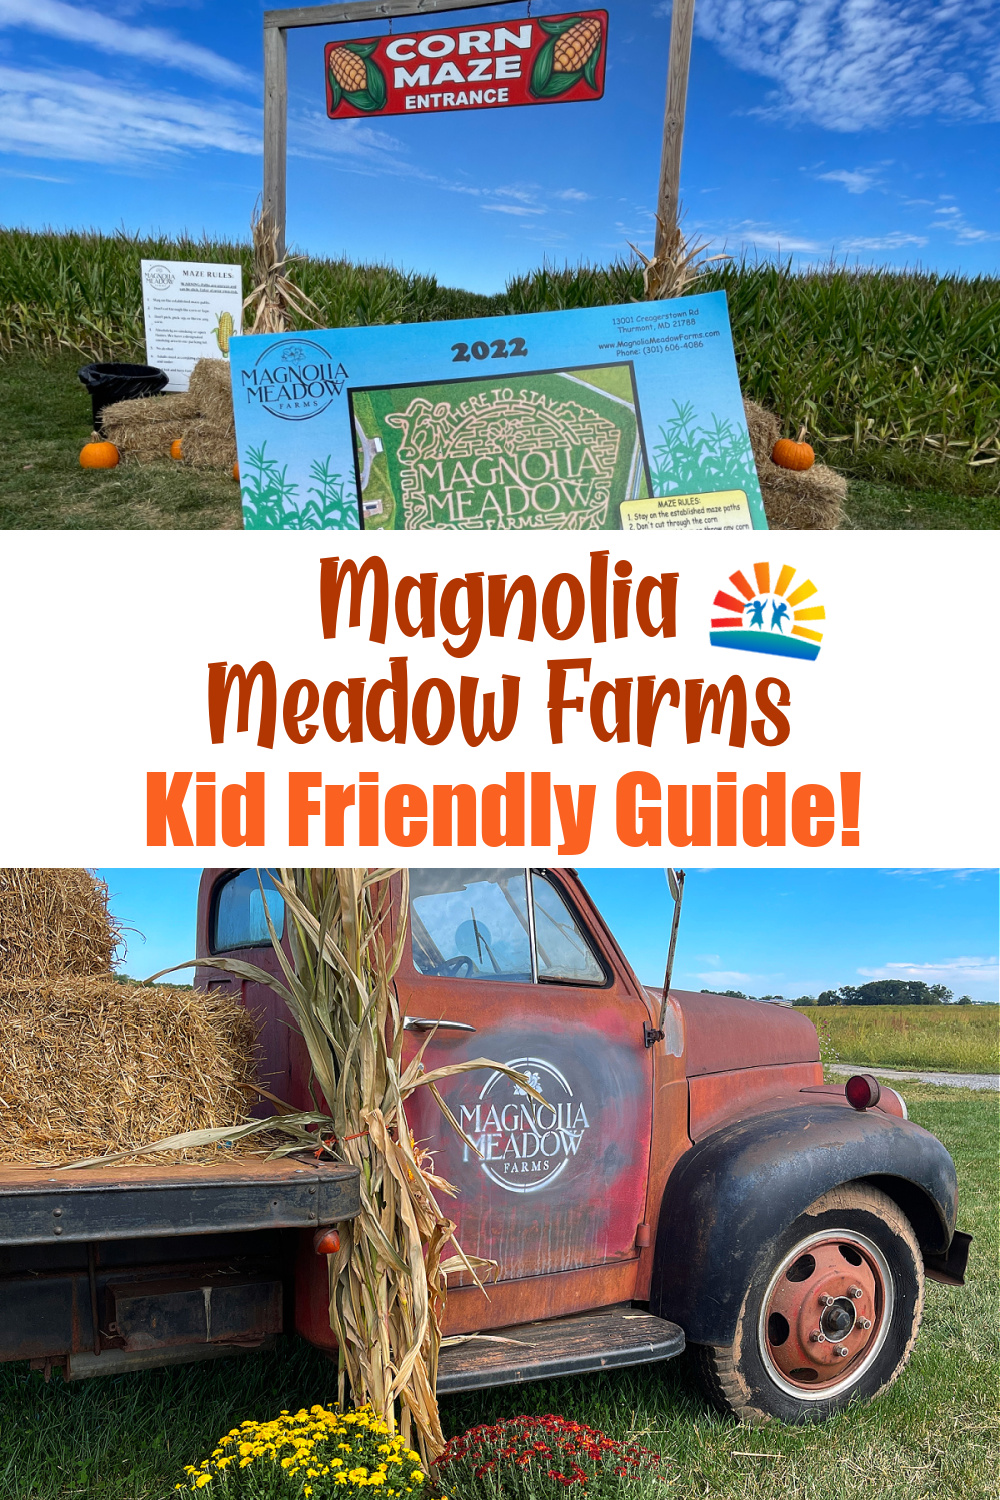 Magnolia Meadow Farms in Frederick County, MD